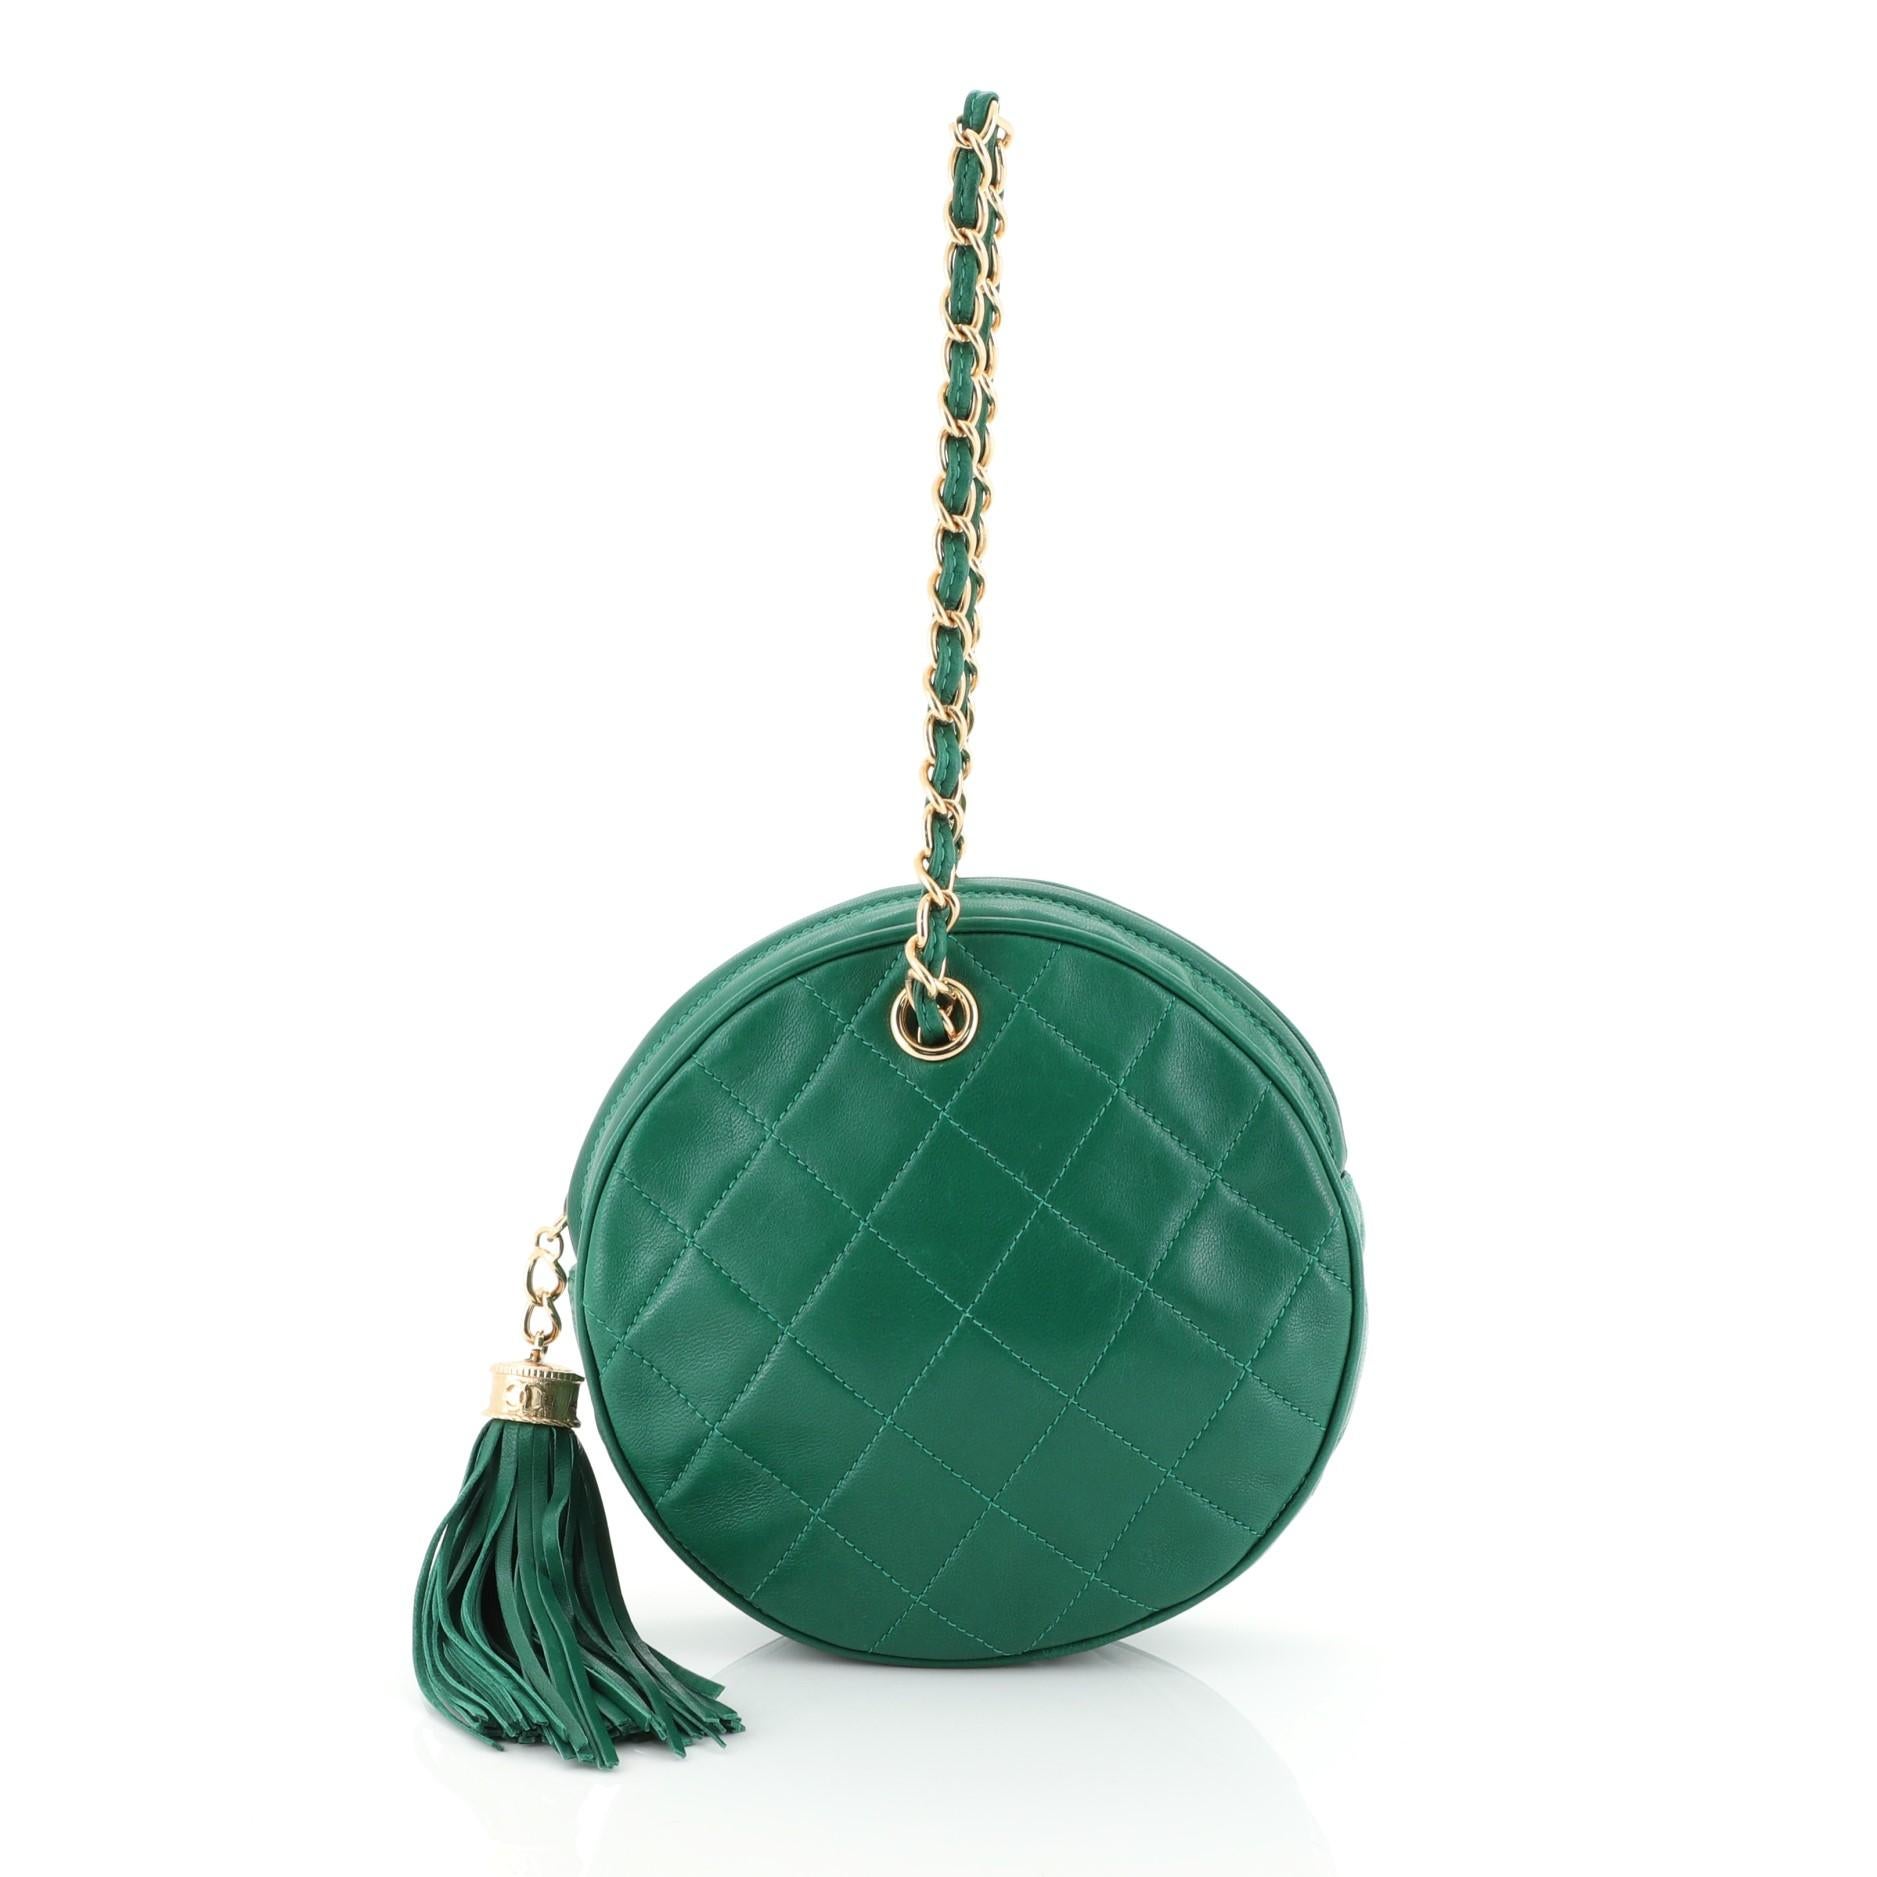 This Chanel Vintage Chain Round Clutch Quilted Lambskin Small, crafted from green quilted lambskin leather, features woven-in leather chain handle, fringe tassel, and gold-tone hardware. Its zip closure opens to a neutral leather interior. Hologram